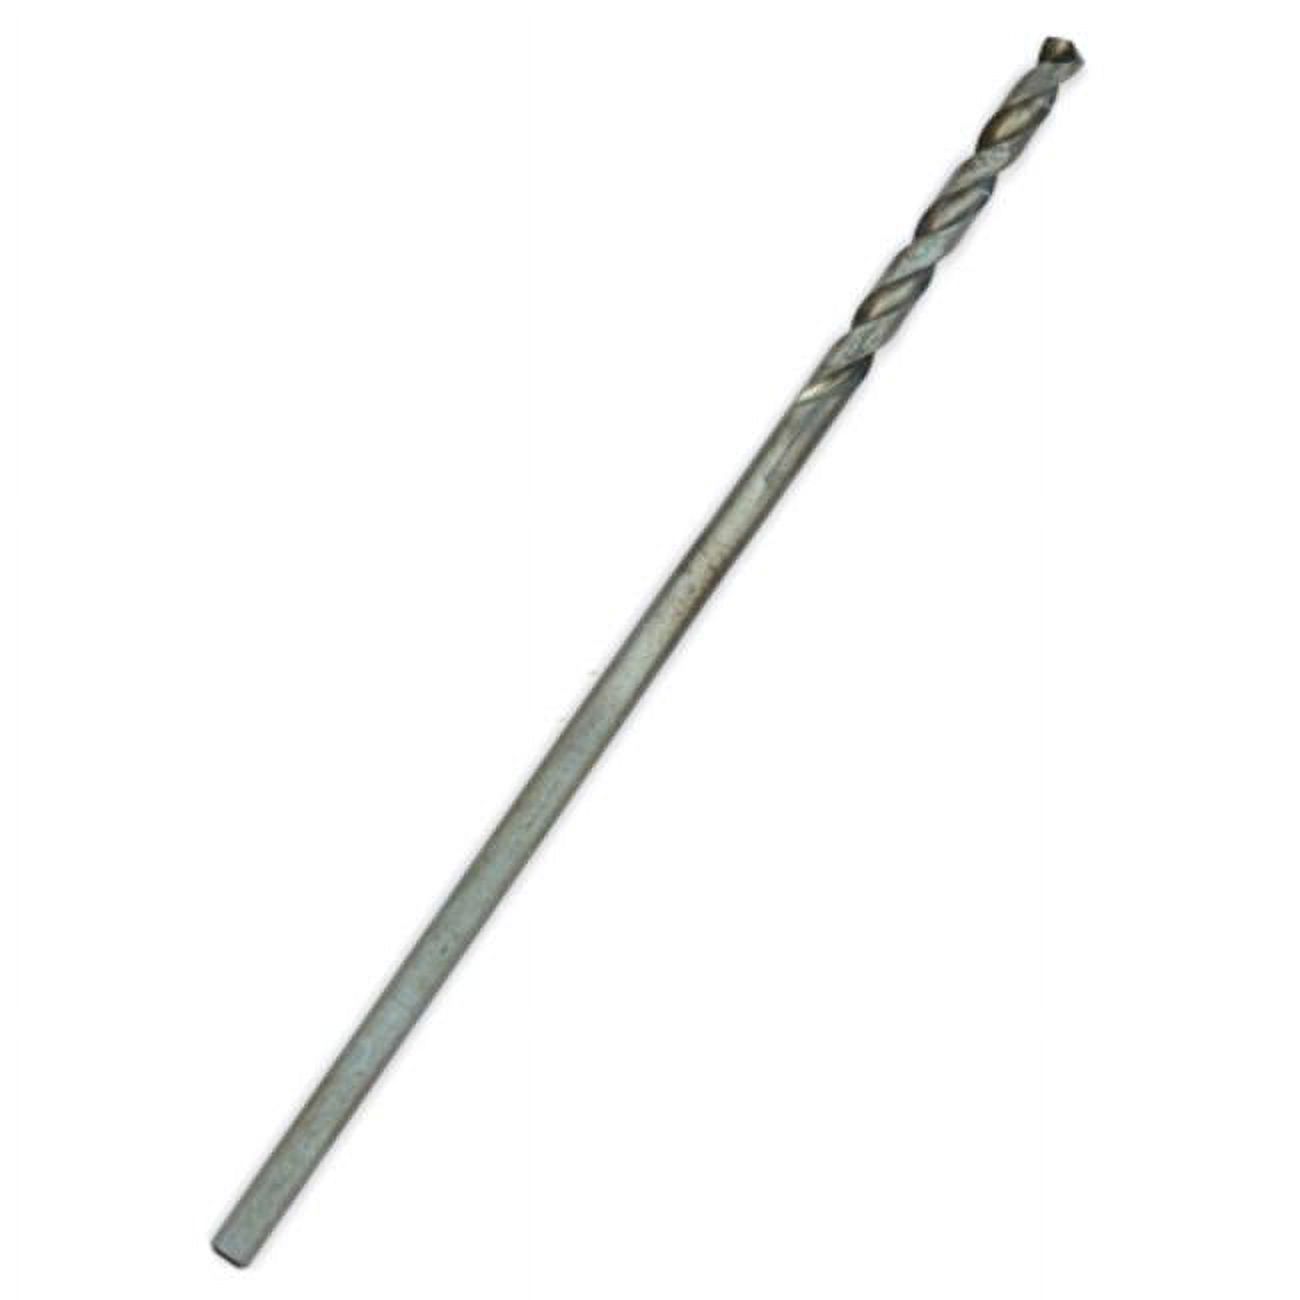 Vermont American .19in. High Speed Steel Extension Length Drill Bit 13162 - image 1 of 2